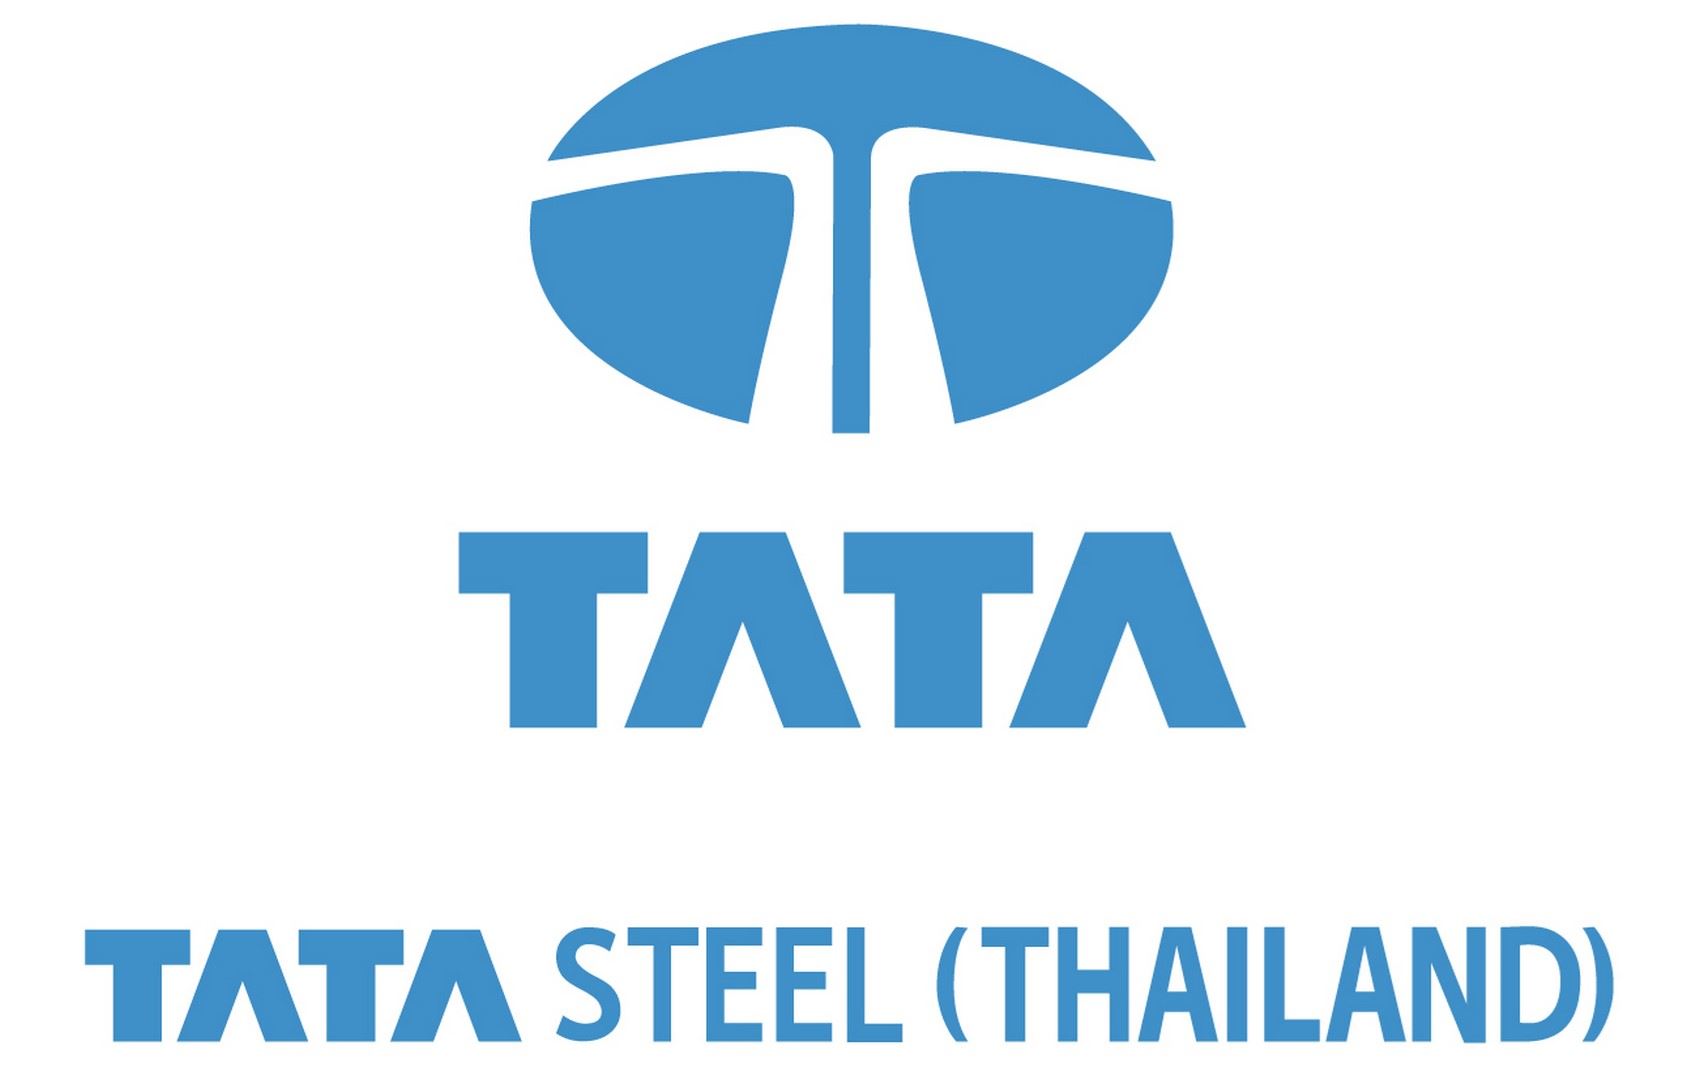 Thailand's steel industry faces challenges